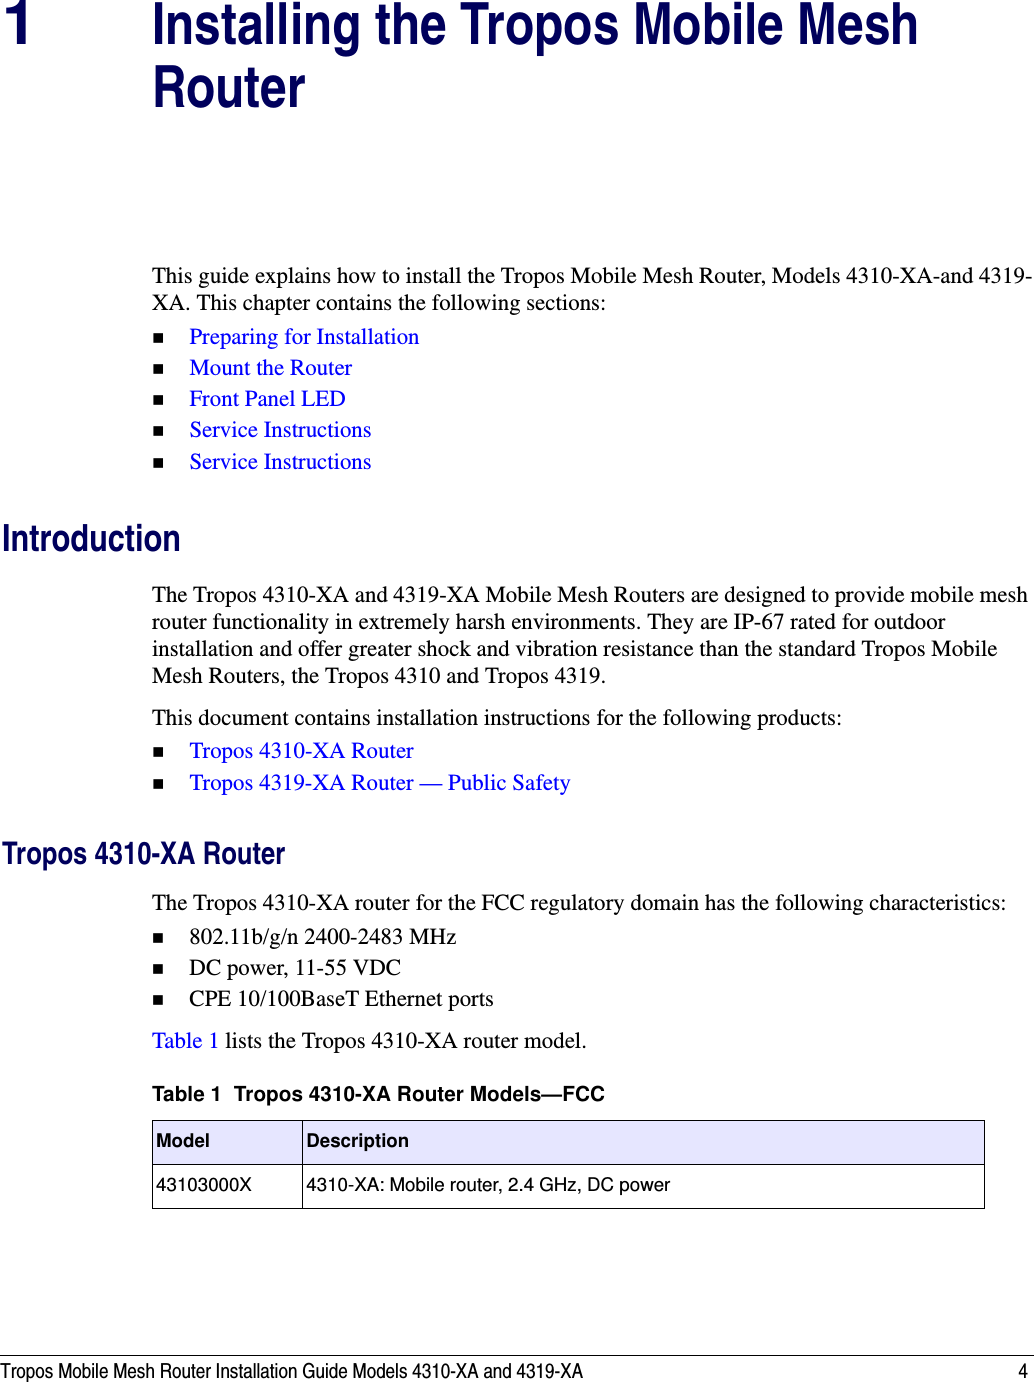 Tropos Mobile Mesh Router Installation Guide Models 4310-XA and 4319-XA 41Installing the Tropos Mobile Mesh RouterThis guide explains how to install the Tropos Mobile Mesh Router, Models 4310-XA-and 4319-XA. This chapter contains the following sections:Preparing for InstallationMount the RouterFront Panel LEDService InstructionsService InstructionsIntroductionThe Tropos 4310-XA and 4319-XA Mobile Mesh Routers are designed to provide mobile mesh router functionality in extremely harsh environments. They are IP-67 rated for outdoor installation and offer greater shock and vibration resistance than the standard Tropos Mobile Mesh Routers, the Tropos 4310 and Tropos 4319.This document contains installation instructions for the following products:Tropos 4310-XA RouterTropos 4319-XA Router — Public SafetyTropos 4310-XA RouterThe Tropos 4310-XA router for the FCC regulatory domain has the following characteristics:802.11b/g/n 2400-2483 MHzDC power, 11-55 VDCCPE 10/100BaseT Ethernet portsTable 1 lists the Tropos 4310-XA router model.Table 1  Tropos 4310-XA Router Models—FCCModel Description43103000X 4310-XA: Mobile router, 2.4 GHz, DC power